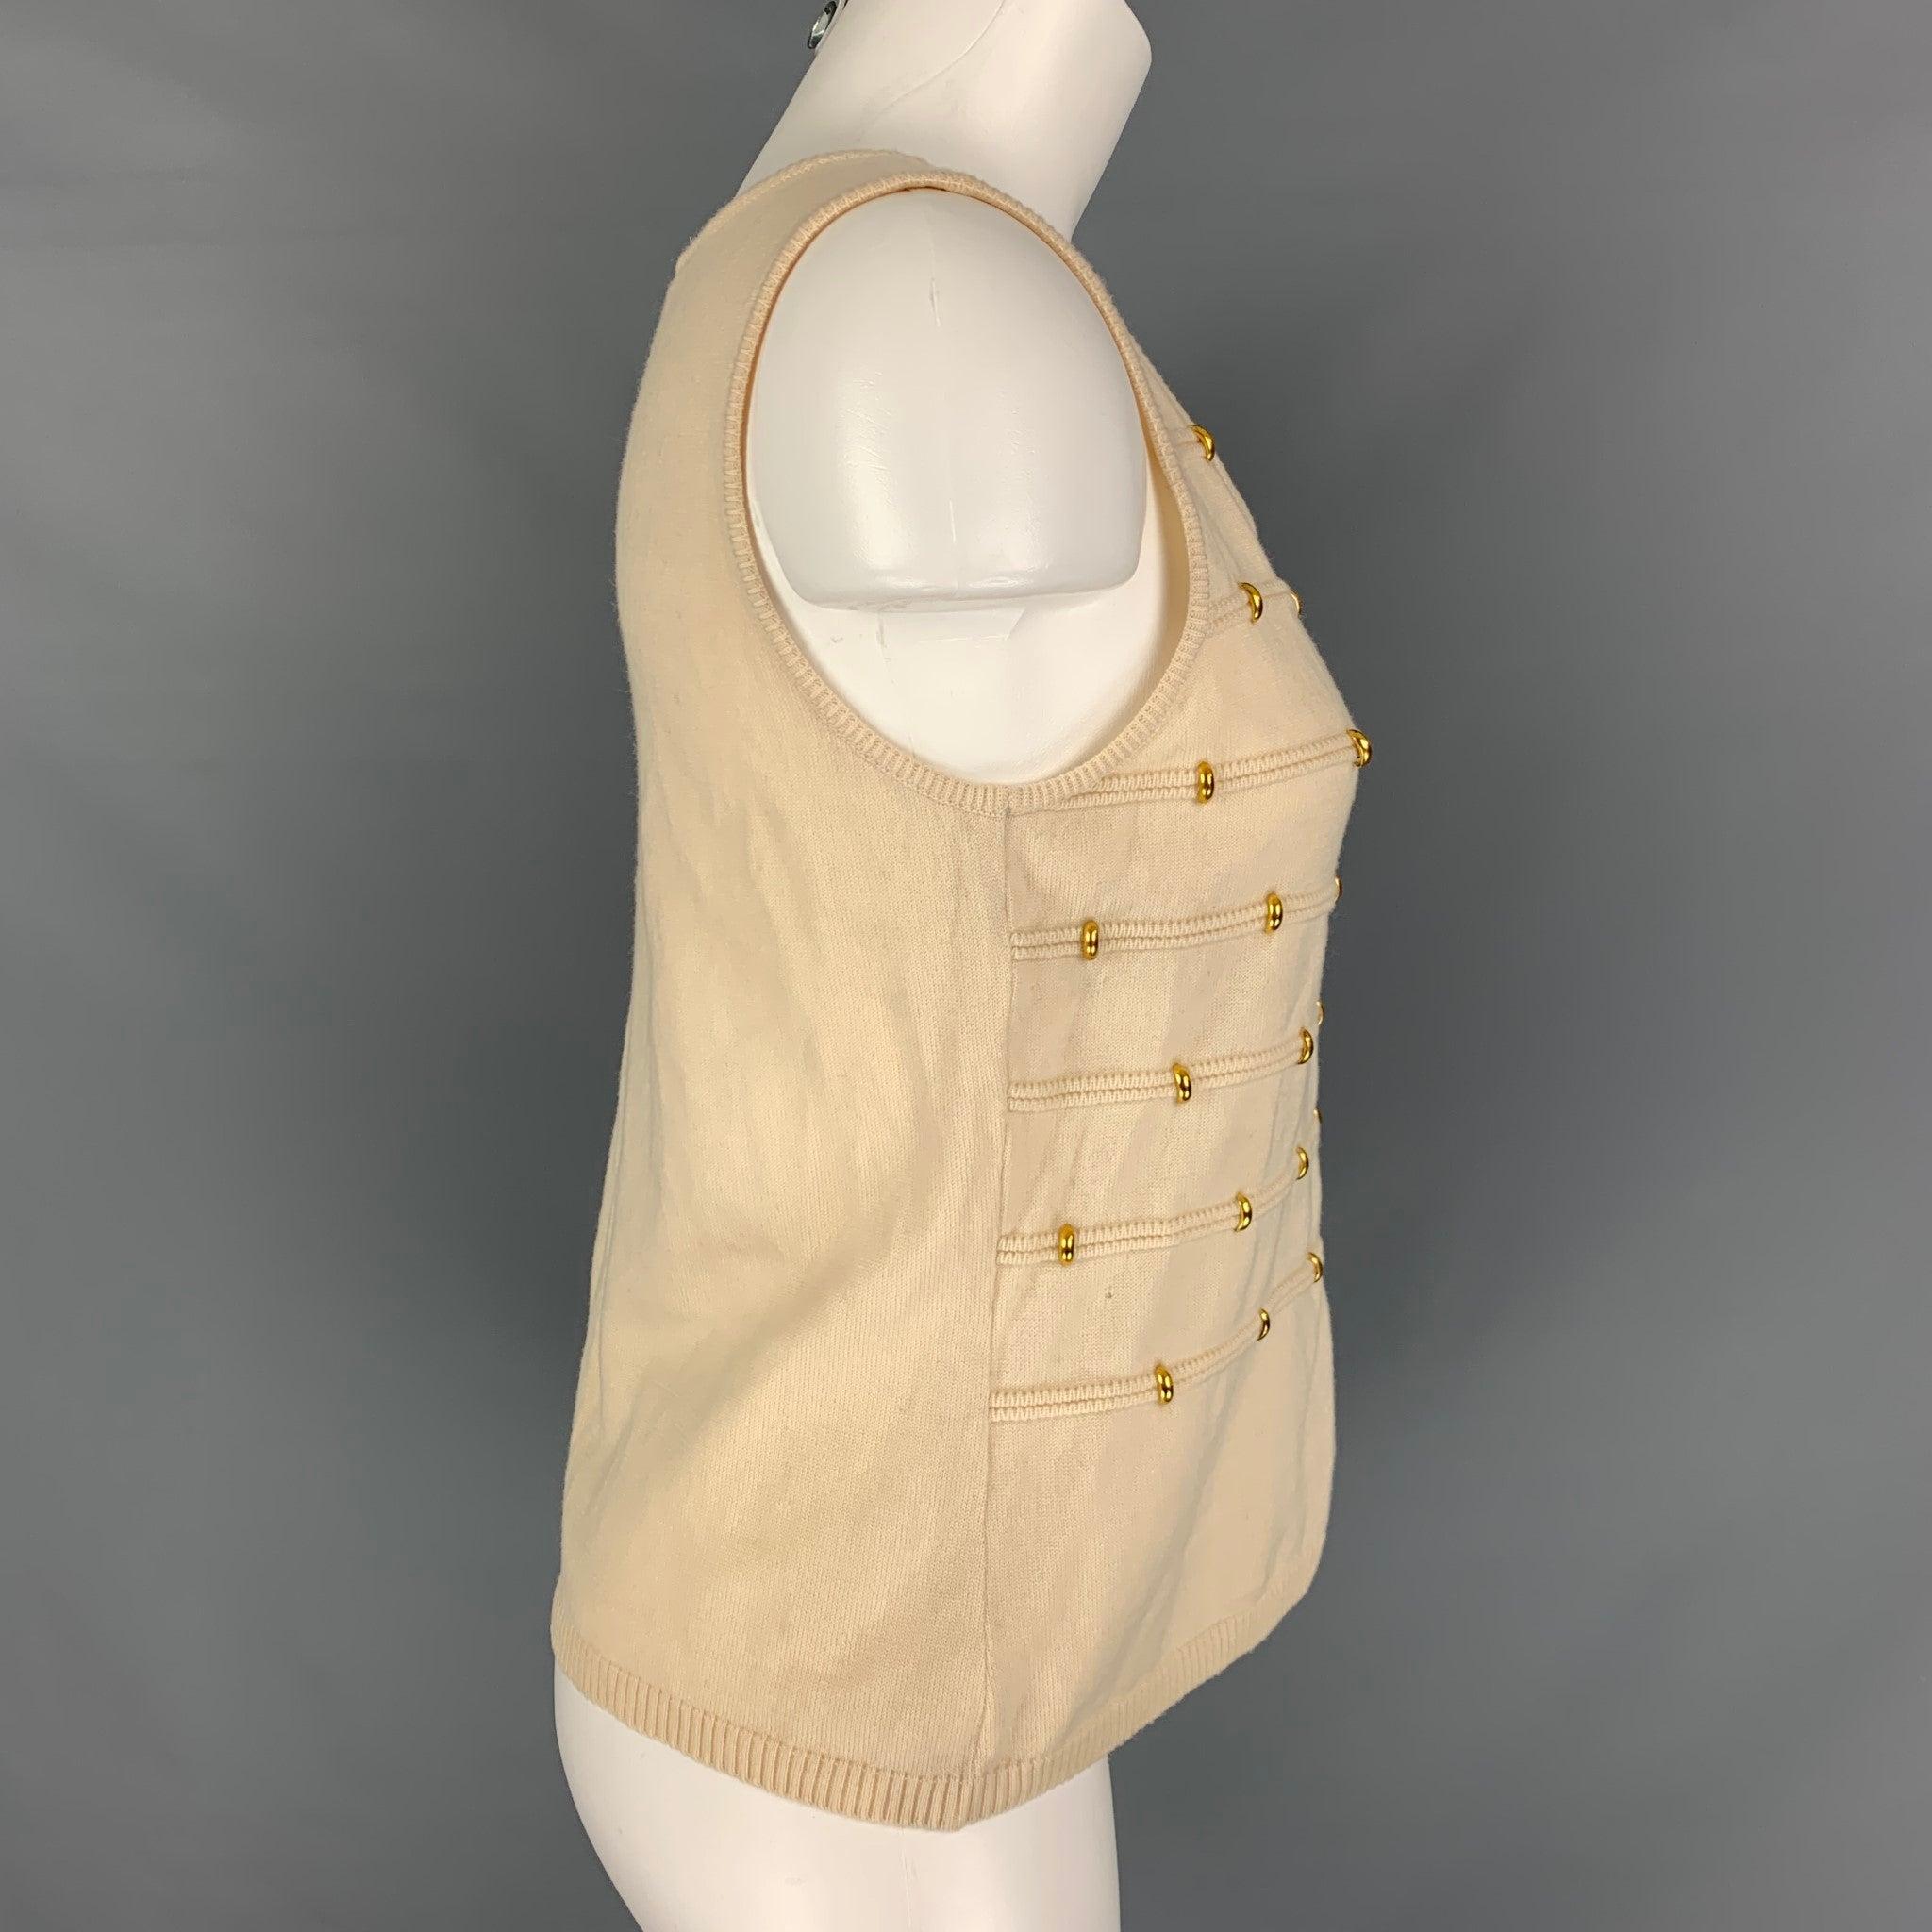 ESCADA sleeveless dress top comes in cream wool knit jersey featuring gold tone embellished and crew neck. Made in Germany.Very Good Pre-Owned Condition. 

Marked:   38 

Measurements: 
 
Shoulder: 13 inches  Bust: 34 inches  Length: 20 inches 
  
 